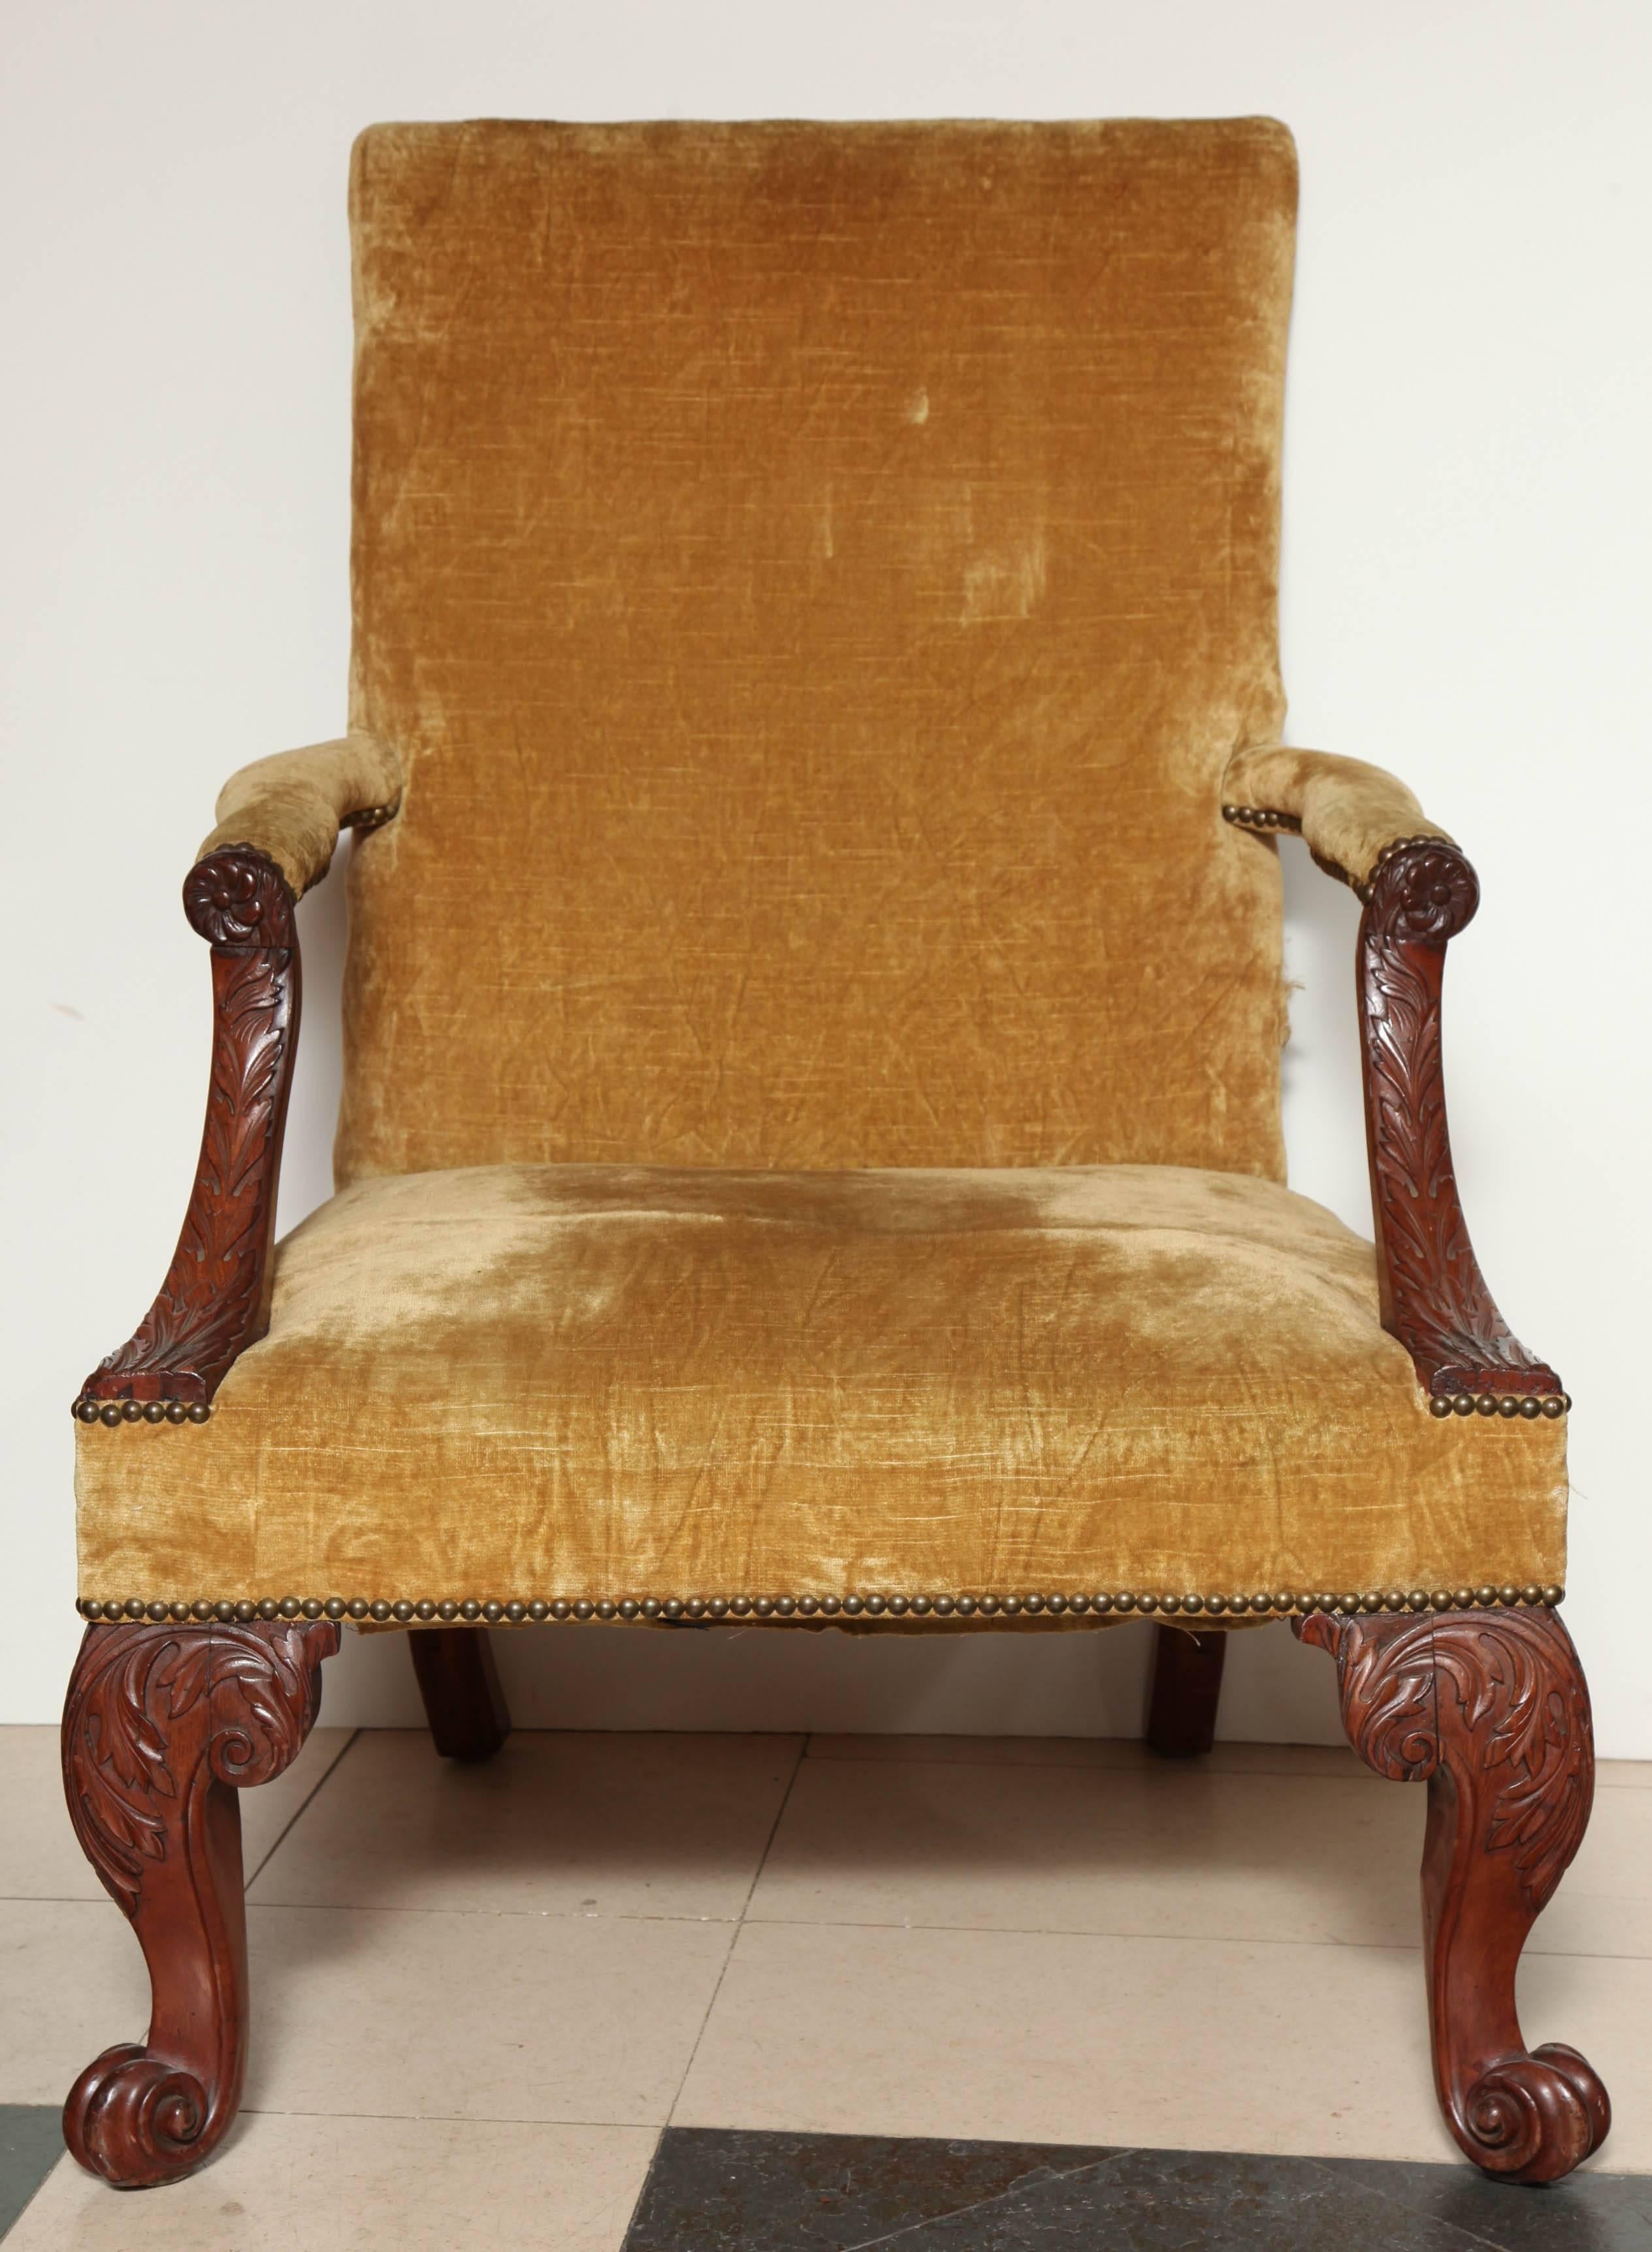 An English George III carved mahogany Gainsborough chair with leaf carved arm supports and front cabriole legs ending in scroll feet.
Re-framed. 